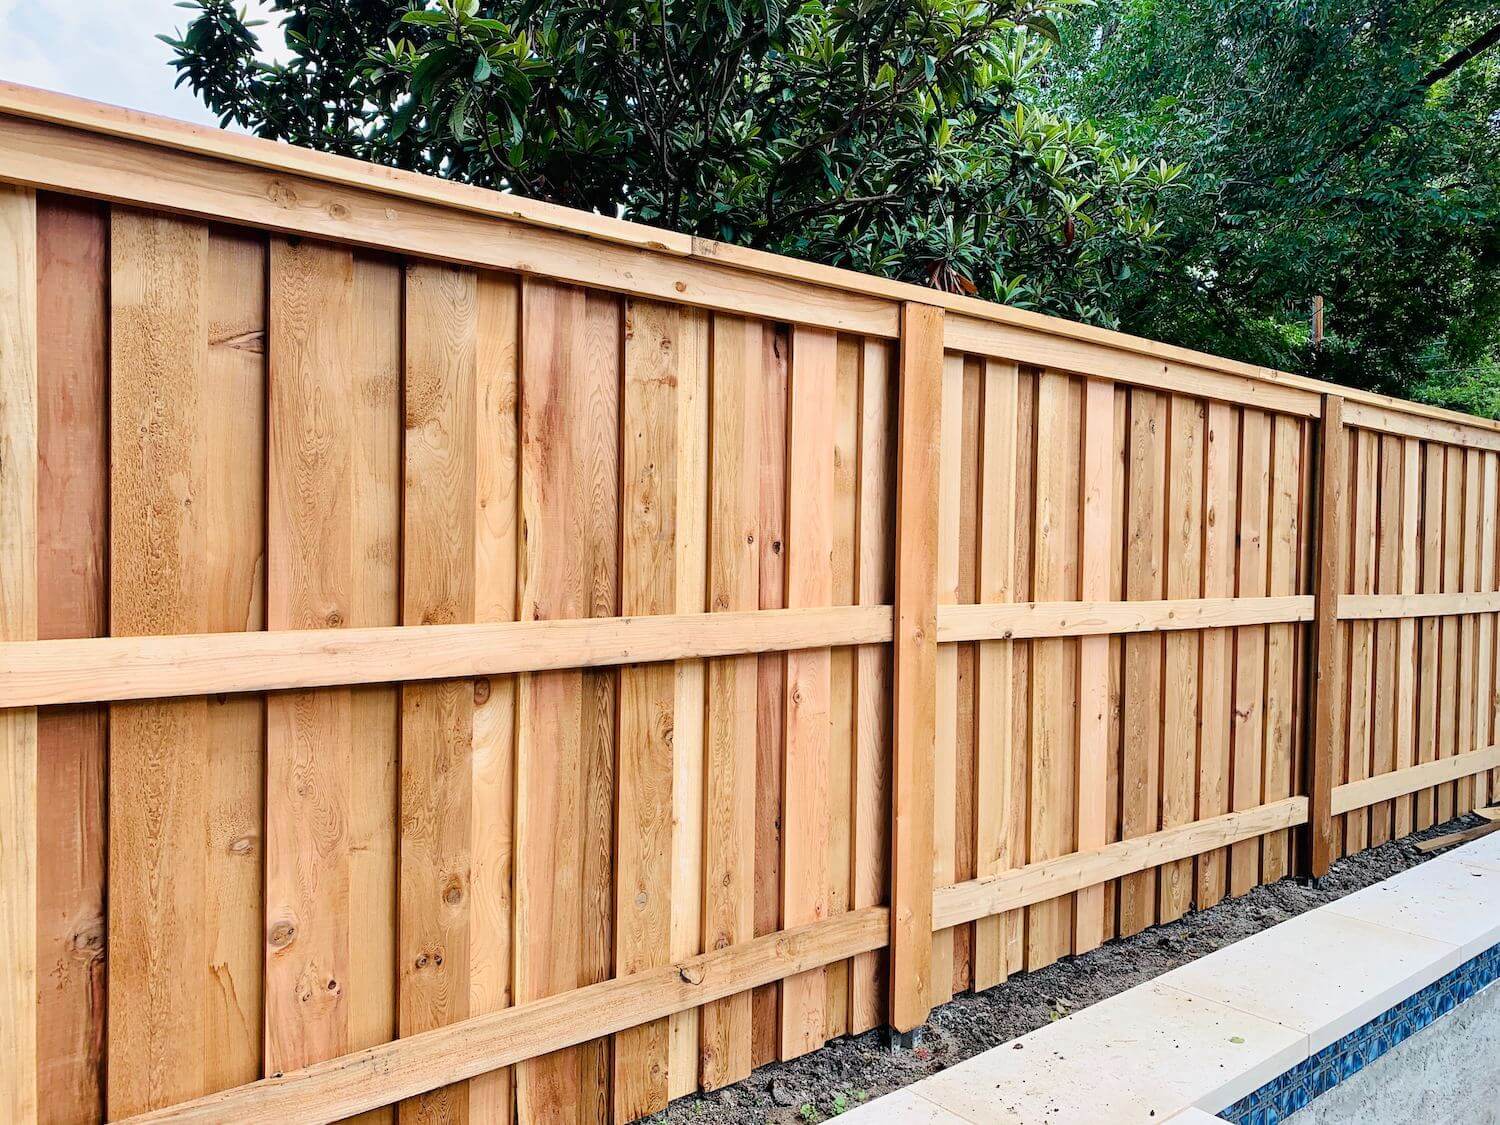 Board on Board Fences: The Fence Type for Ultimate Privacy